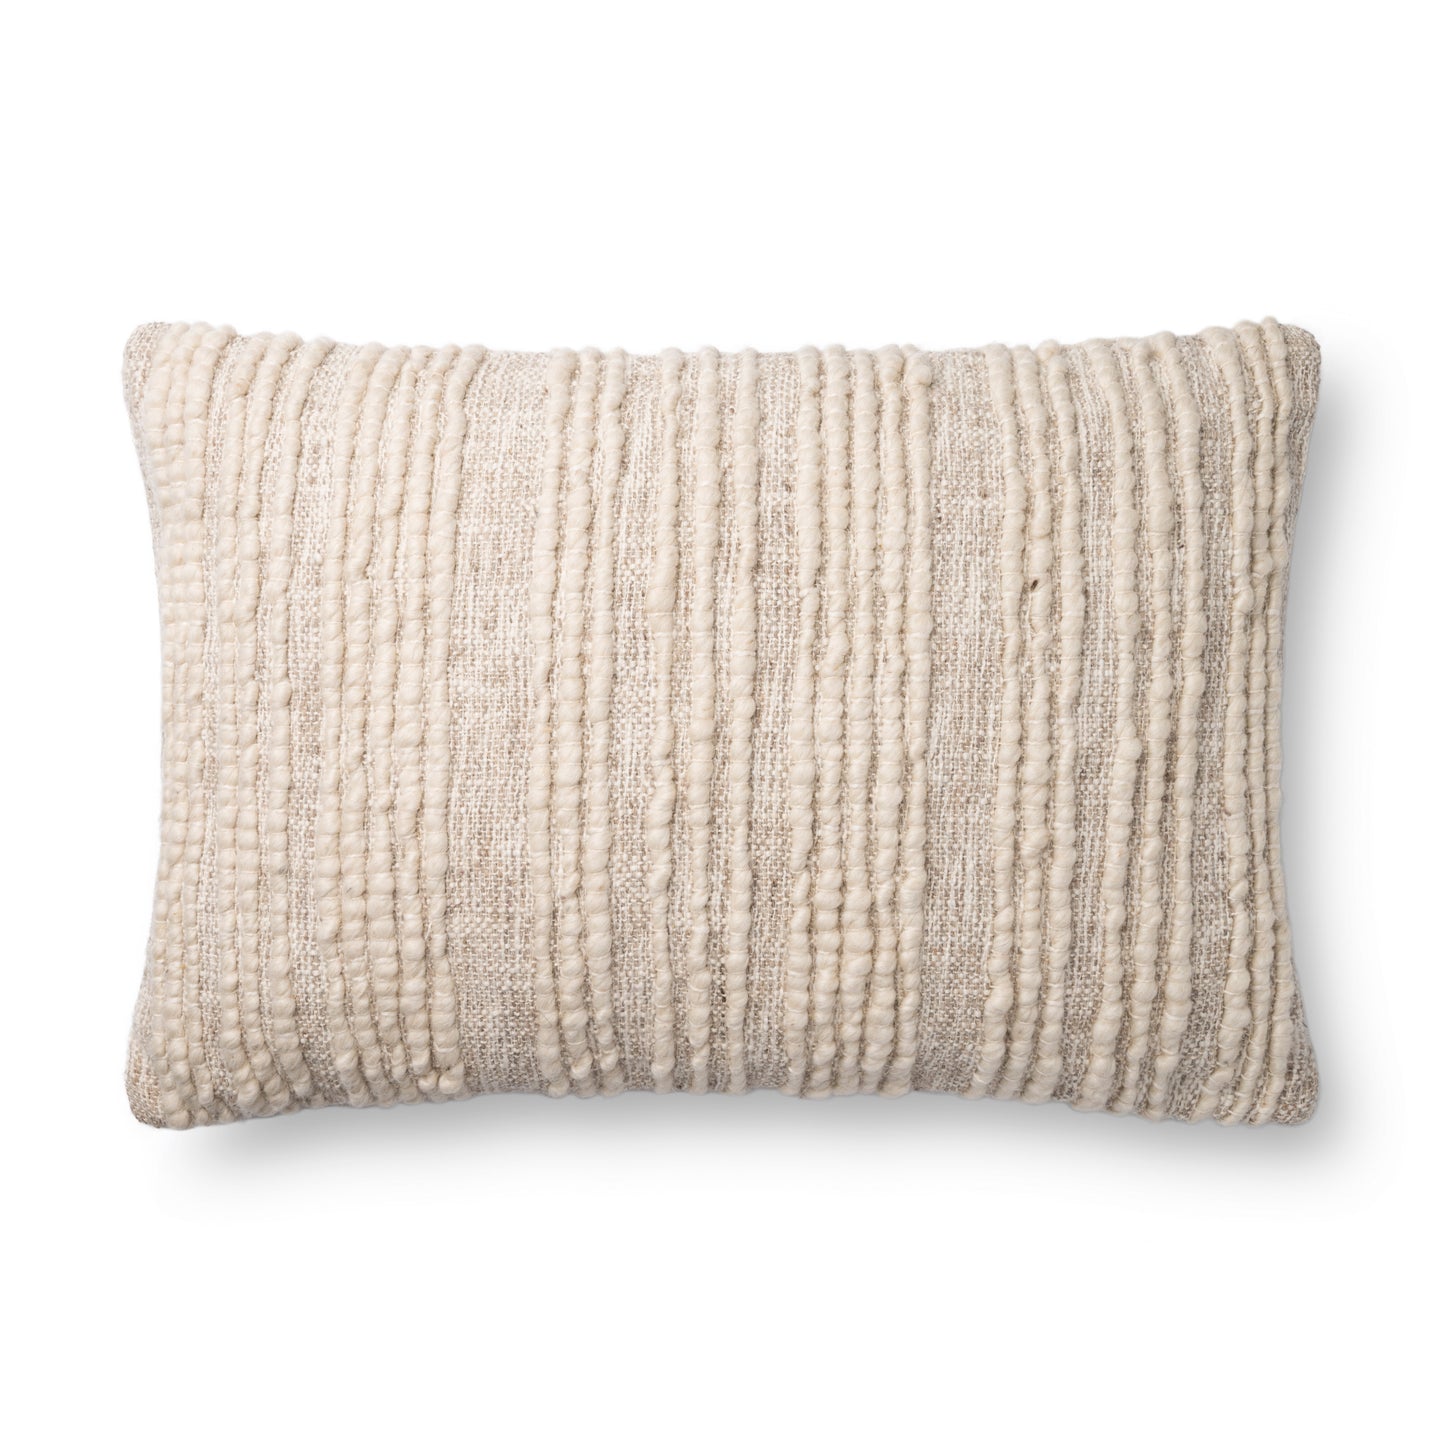 PILLOWS P0862 Cotton Indoor Pillow from Loloi